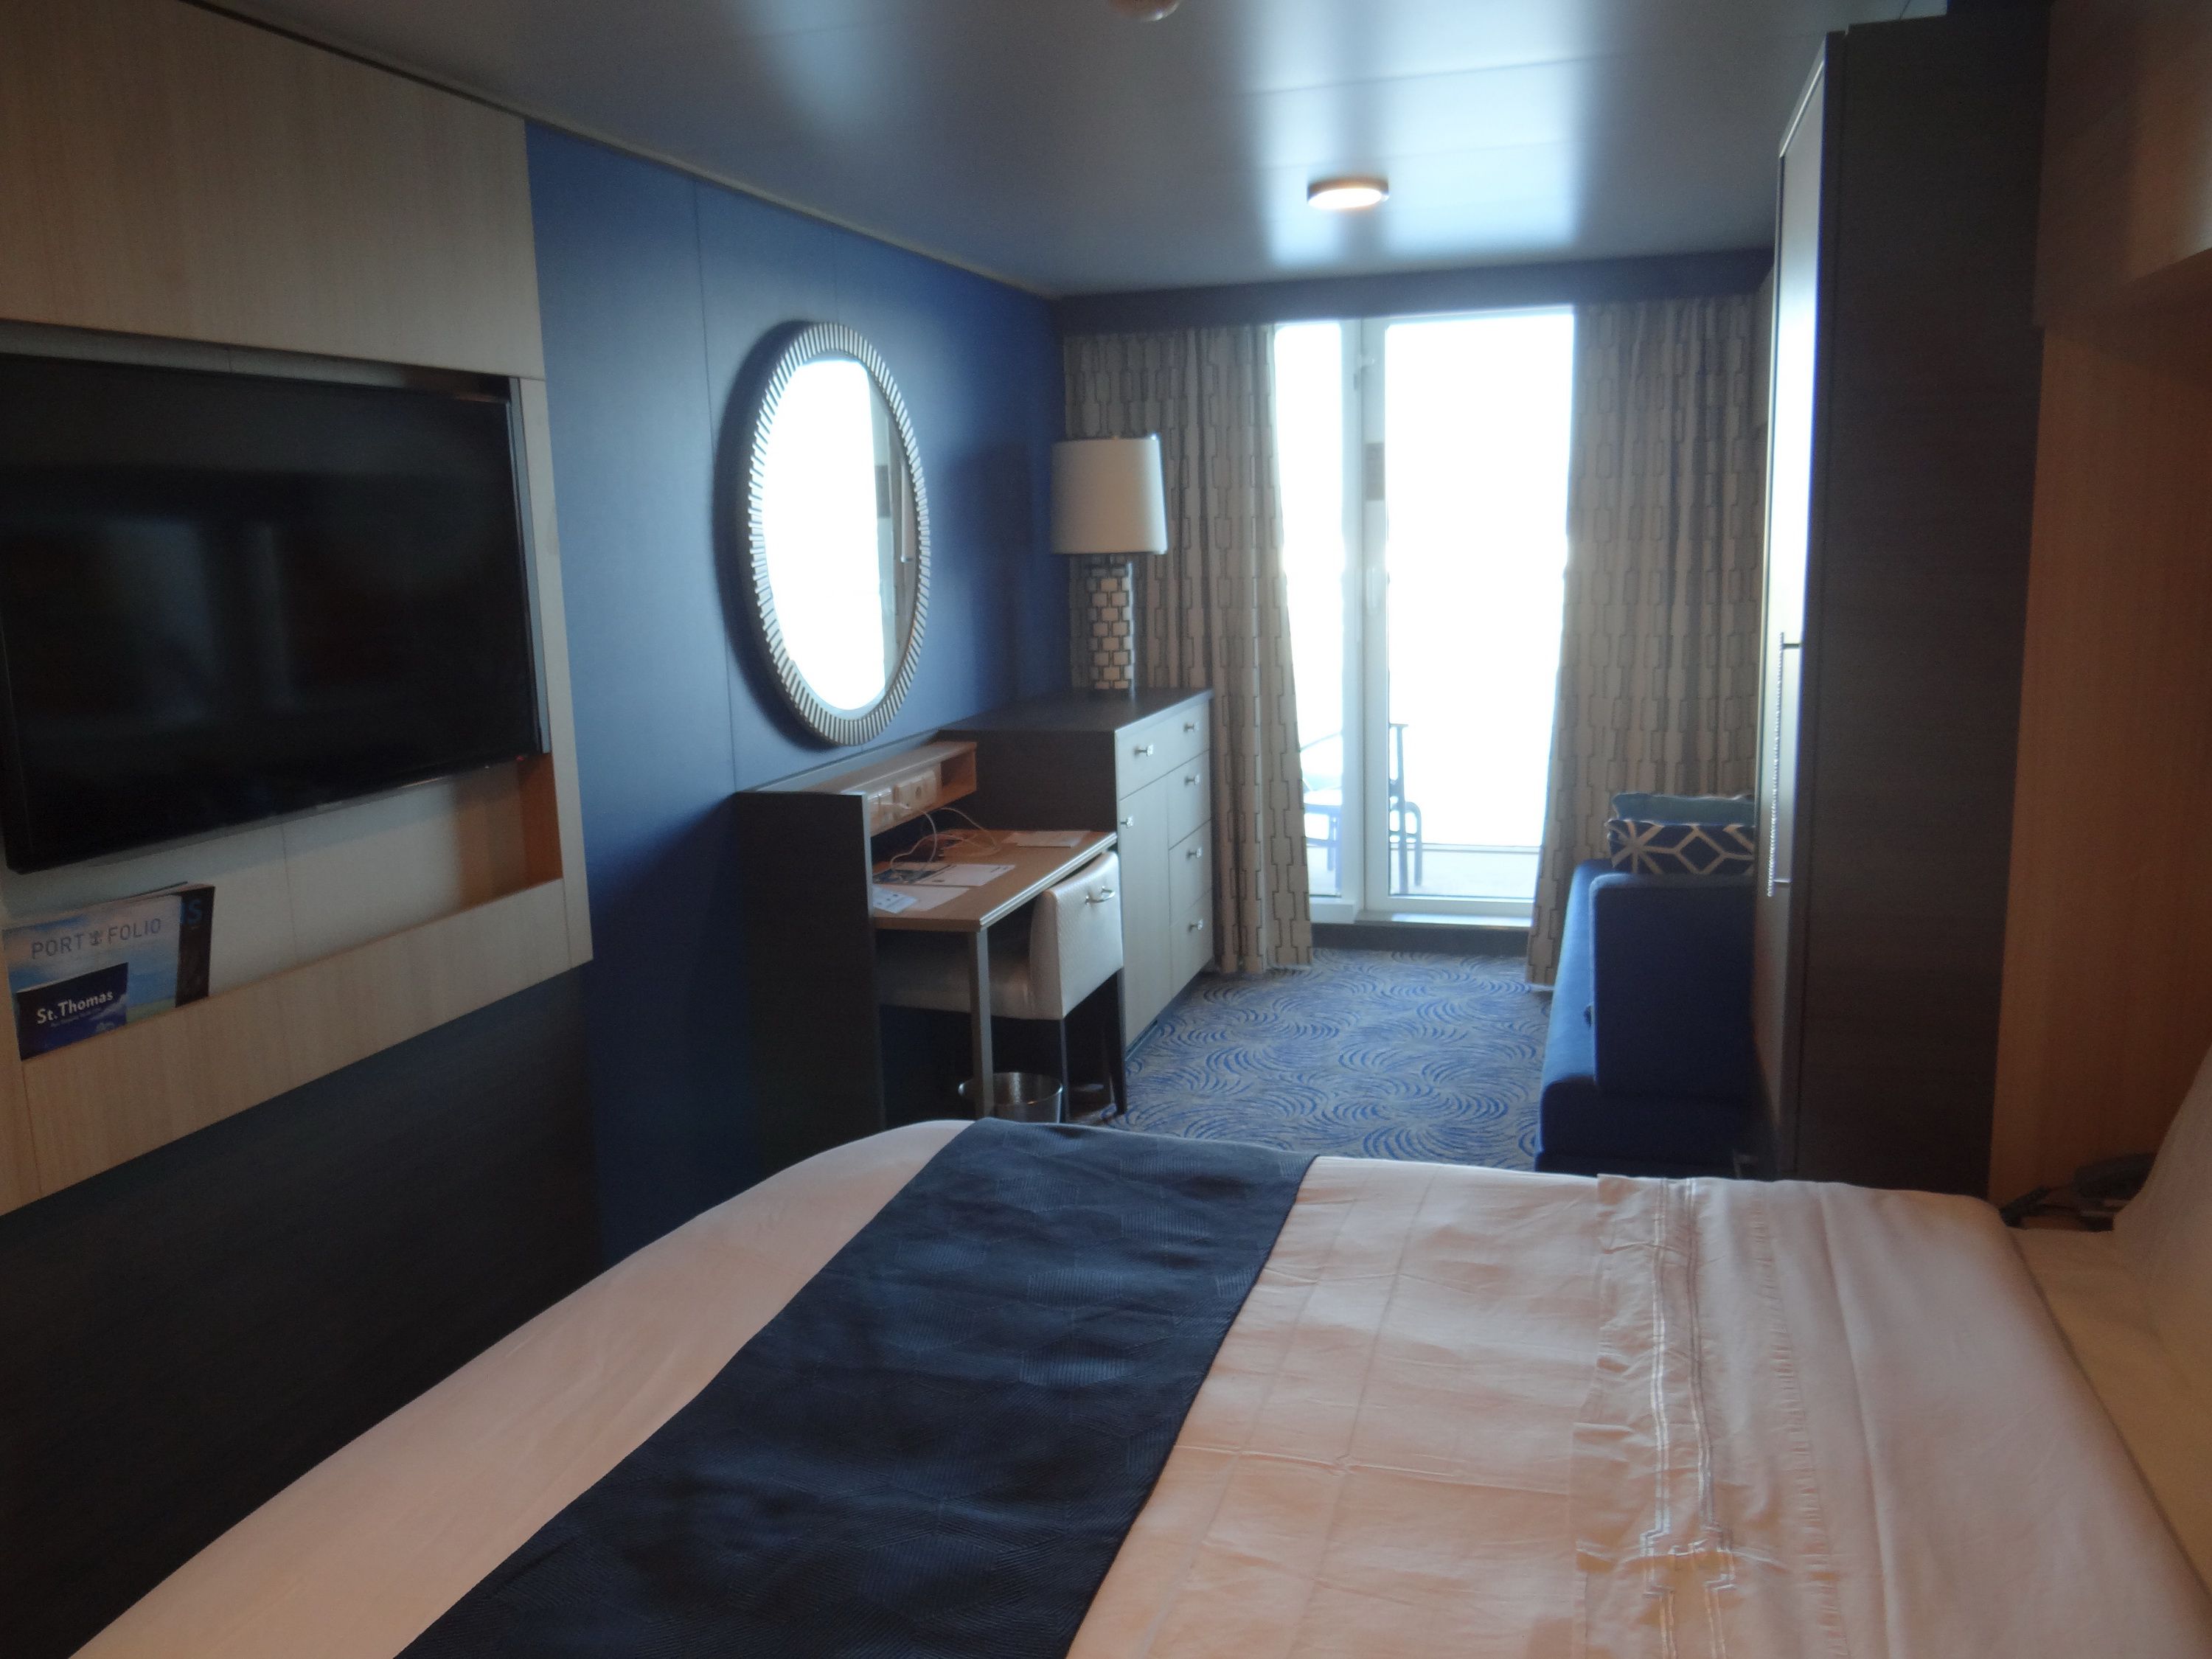 Quantum of the Seas Cruise Ship Cabins and Suites